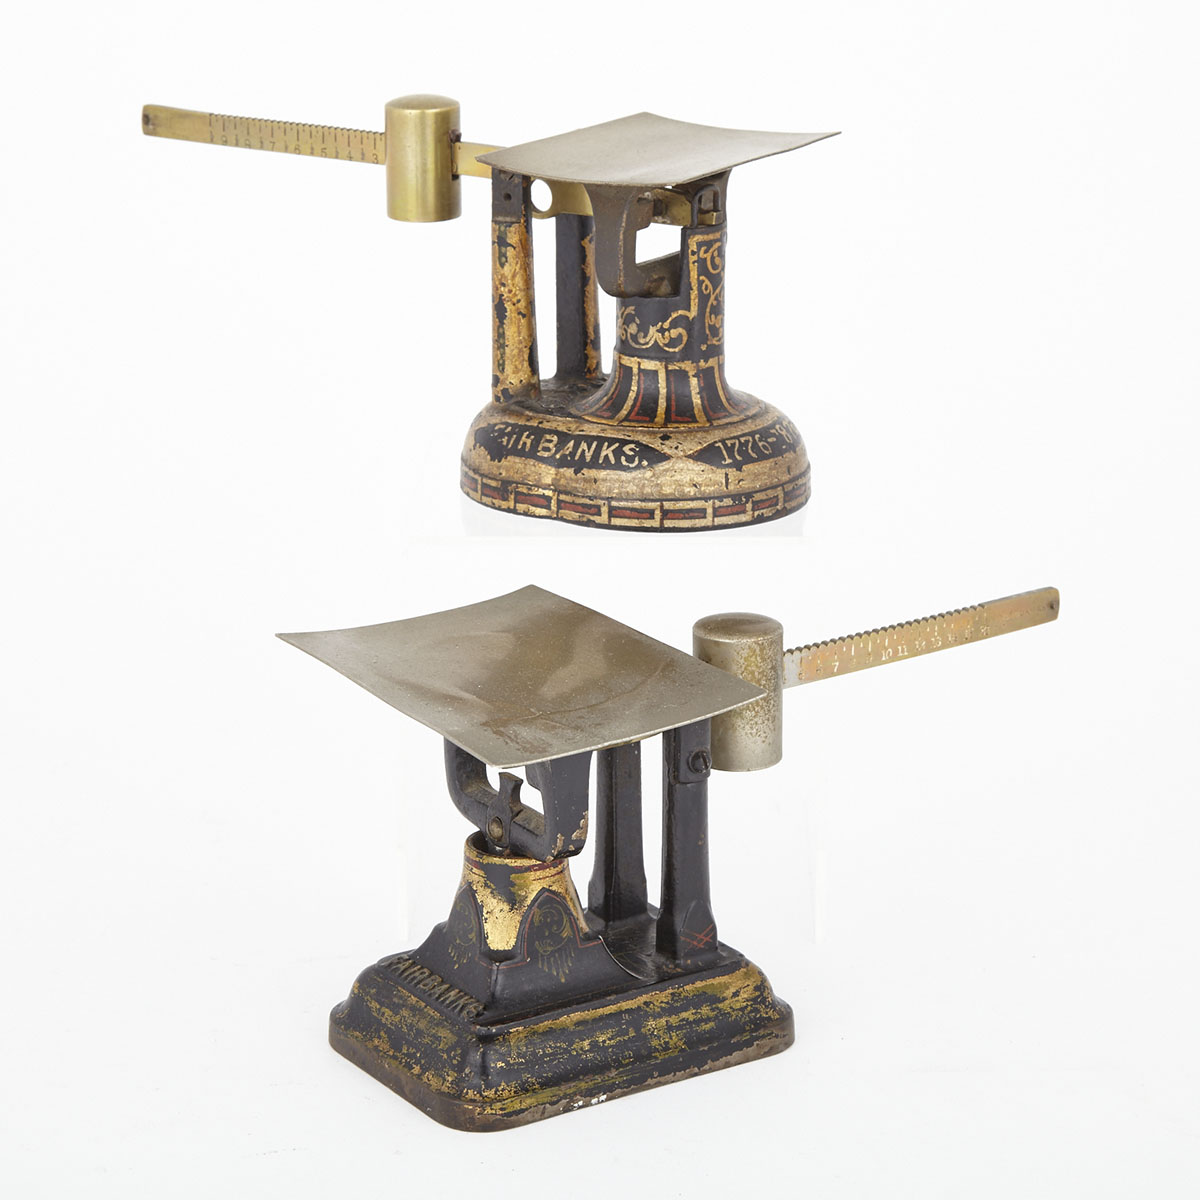 Two American Fairbanks Manufacturing Co. Cast Iron and Brass Postal Scales, 19th century